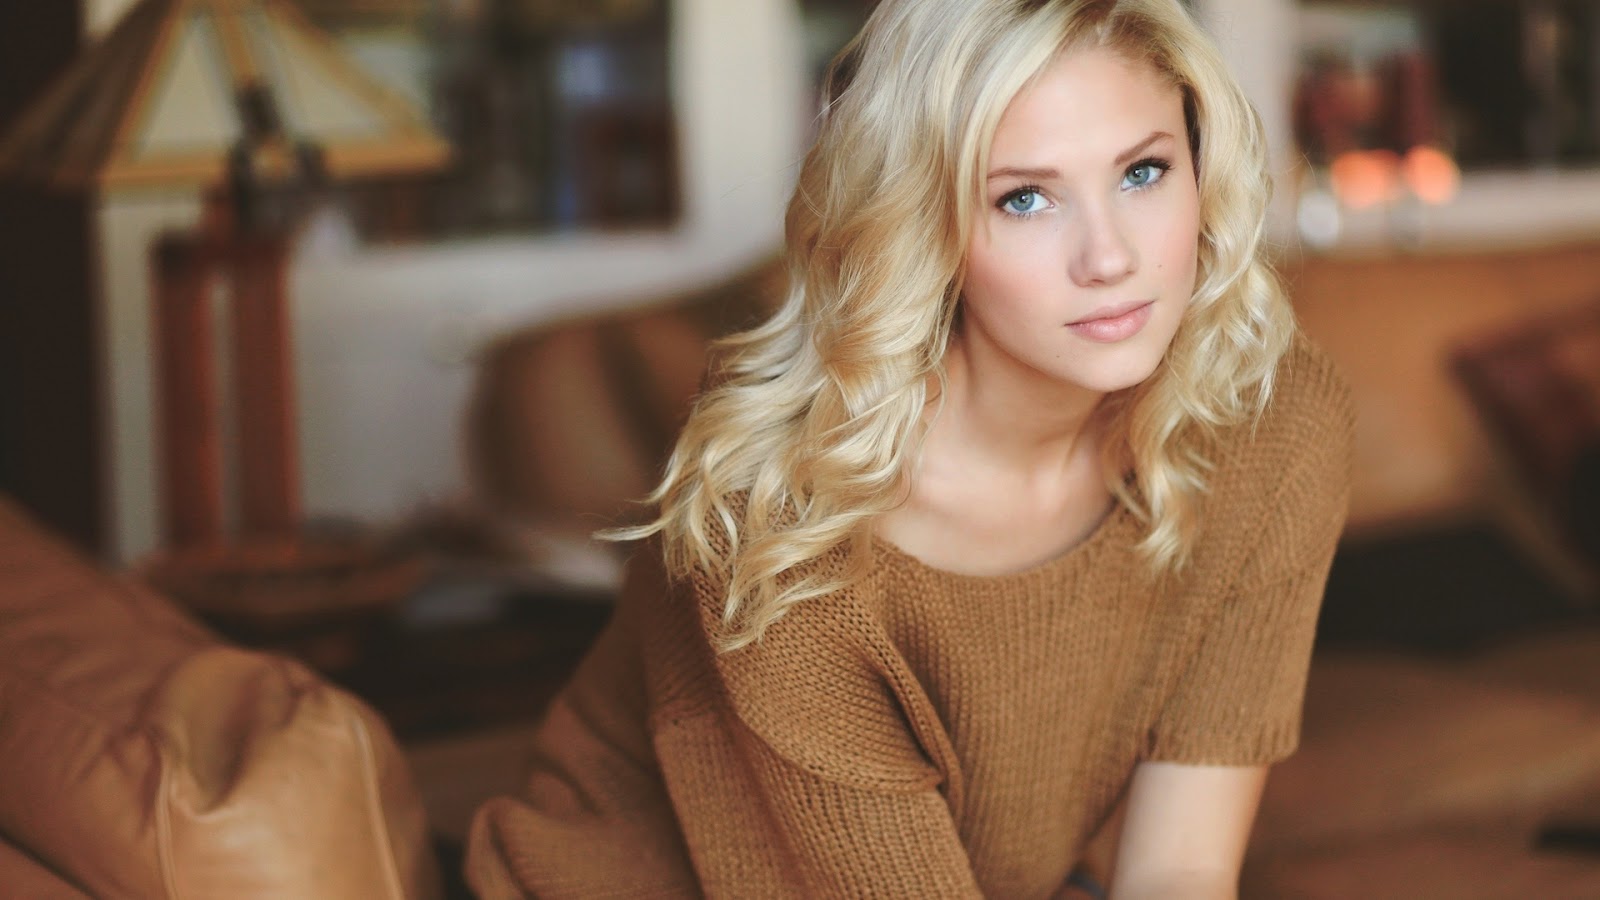 blonde girl wallpaper,hair,blond,face,hairstyle,beauty